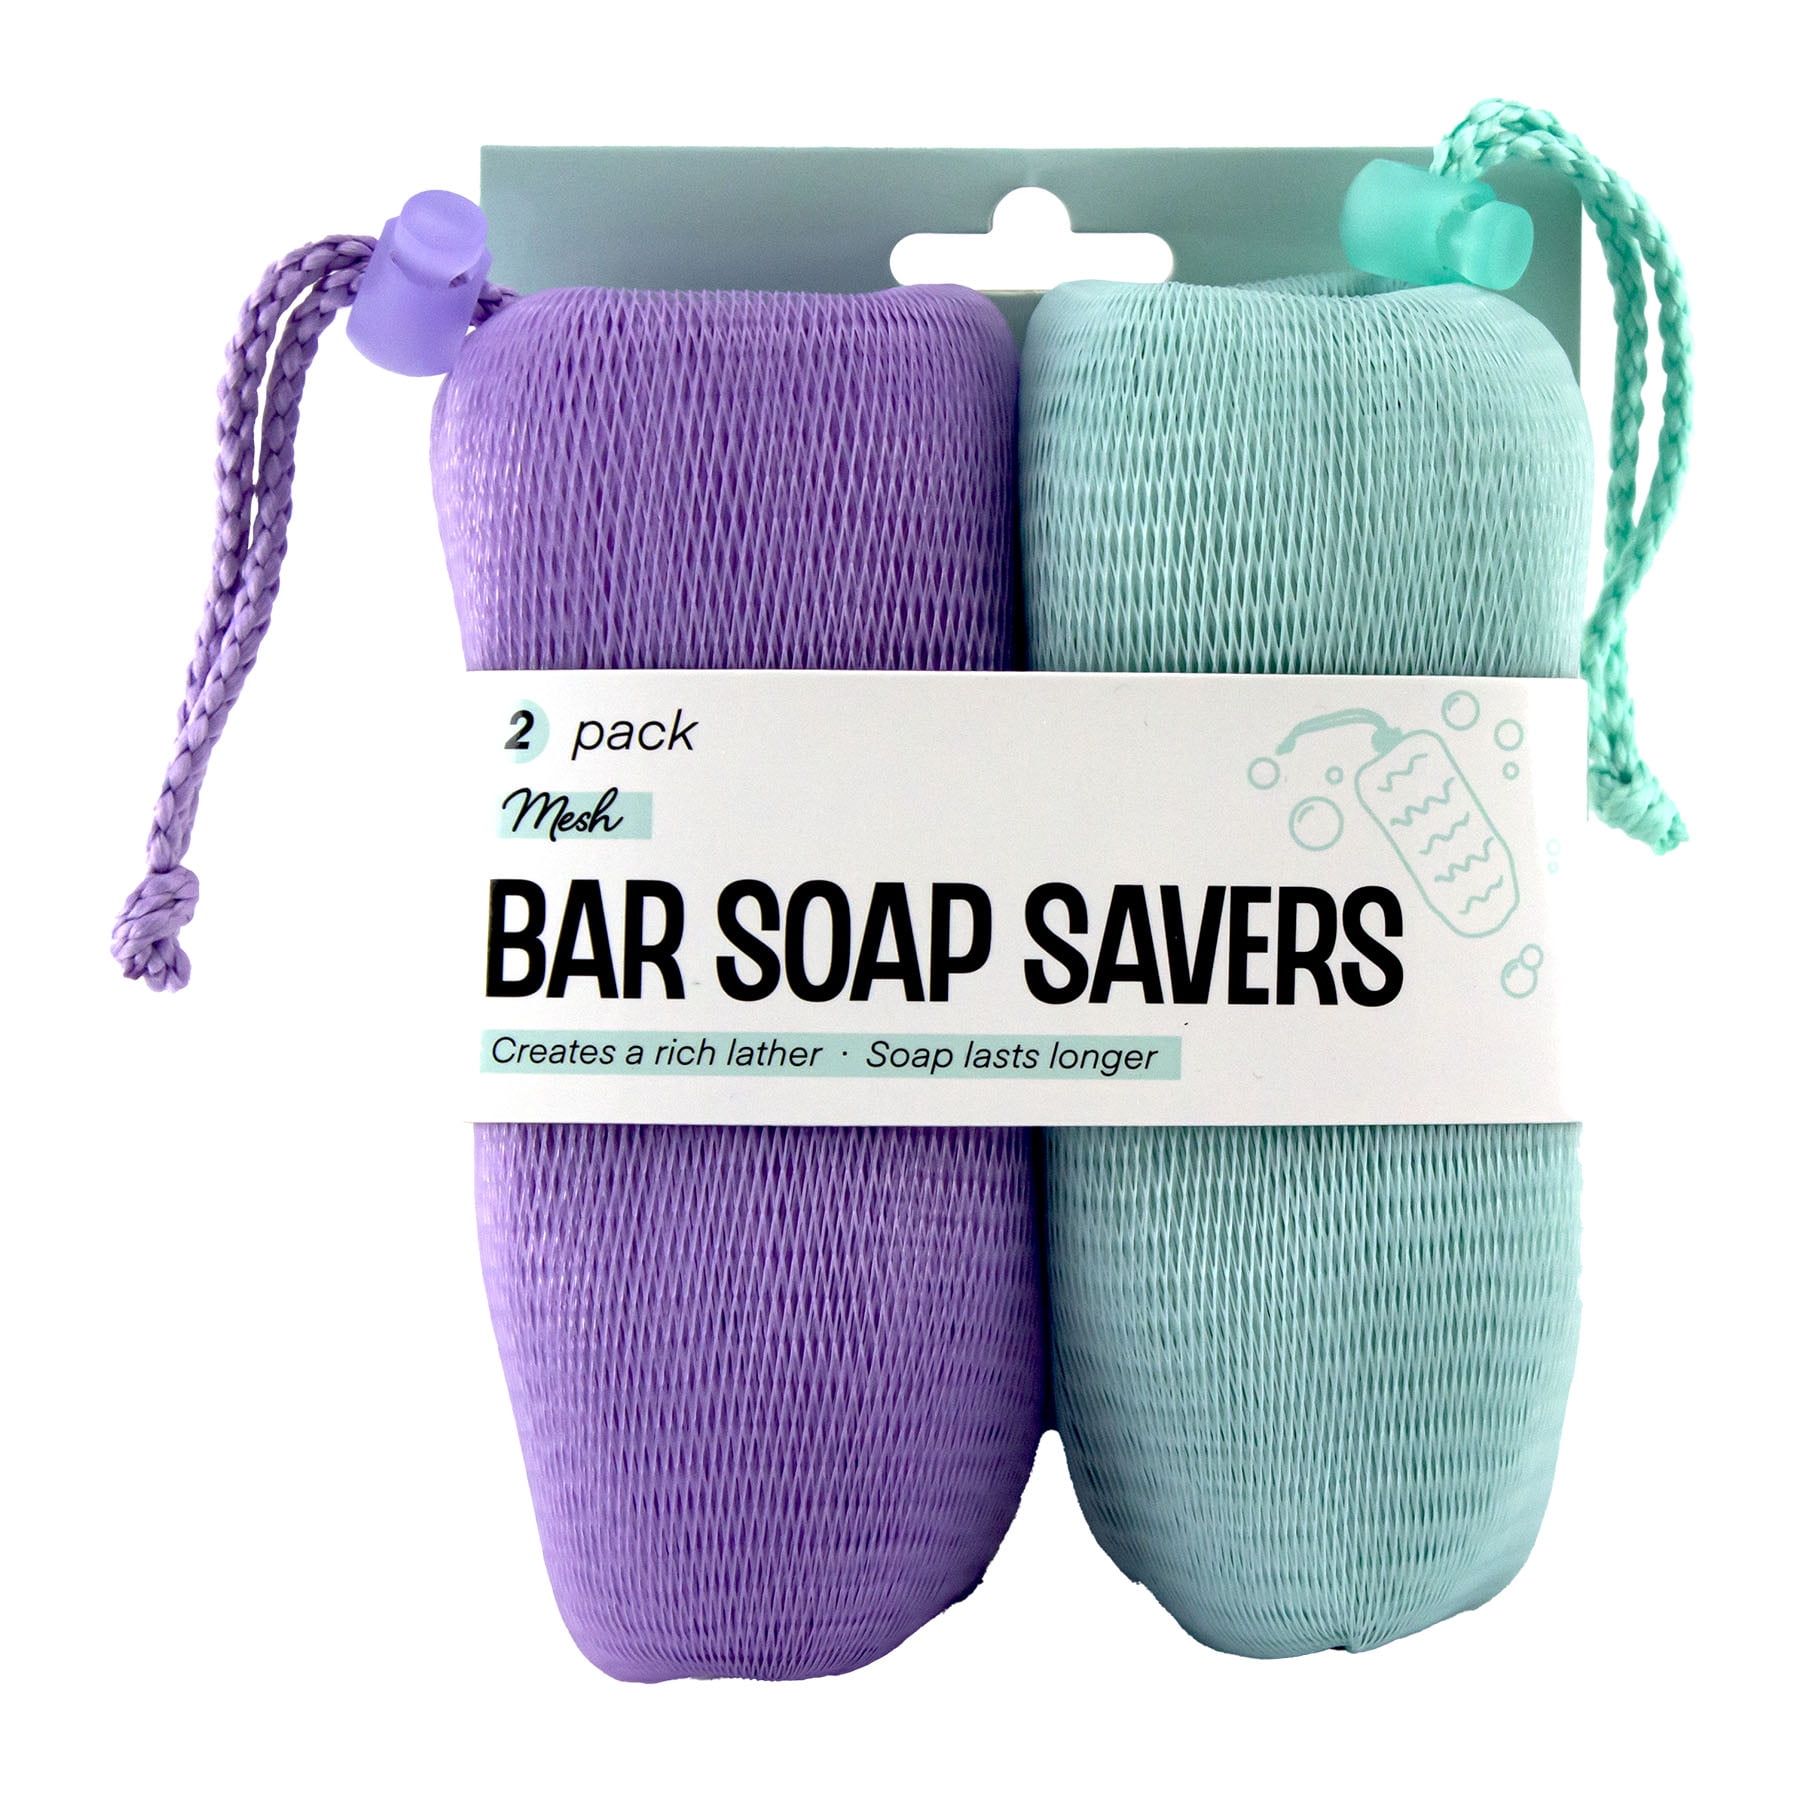 Anyone have experience with these soap savers? Thinking of getting